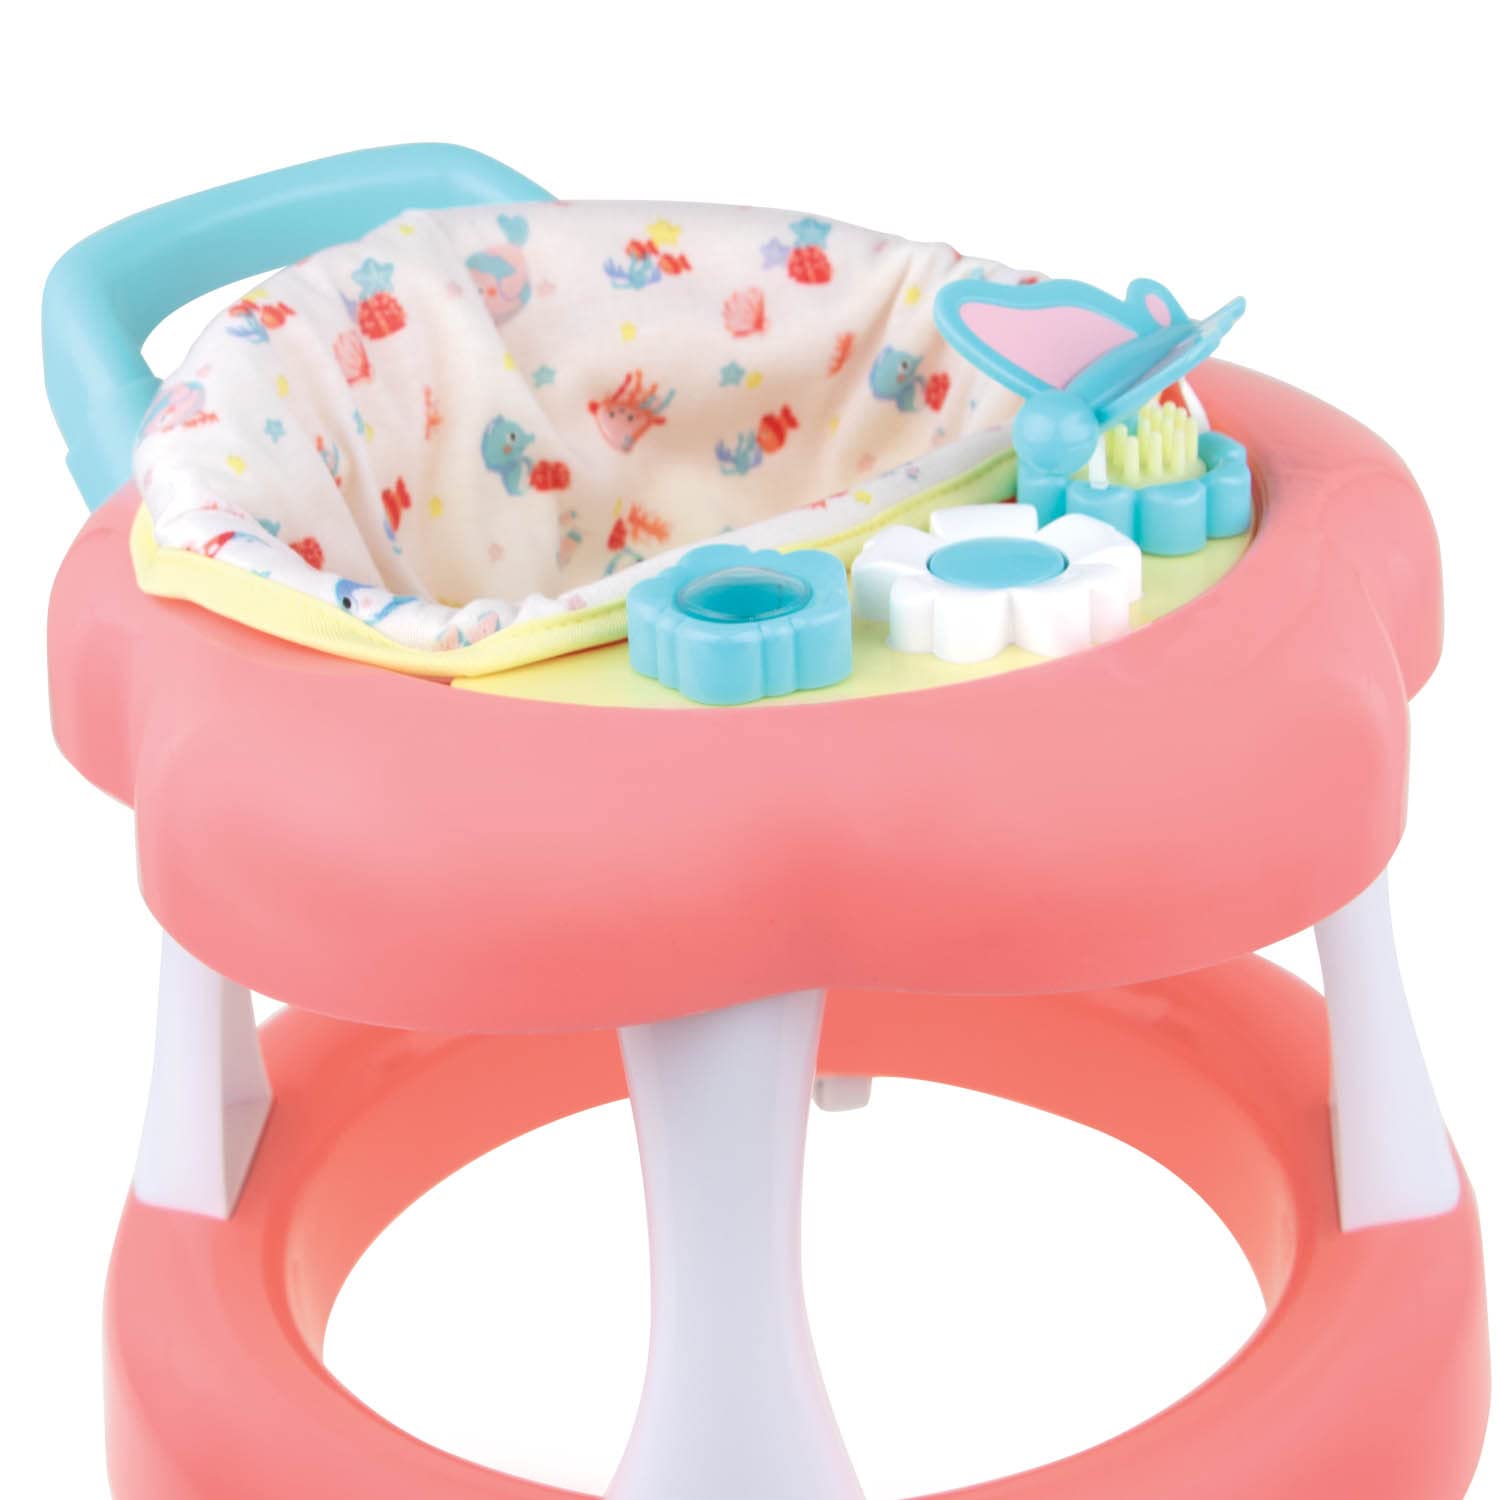 JC Toys Baby Doll Walker Playset, Pink